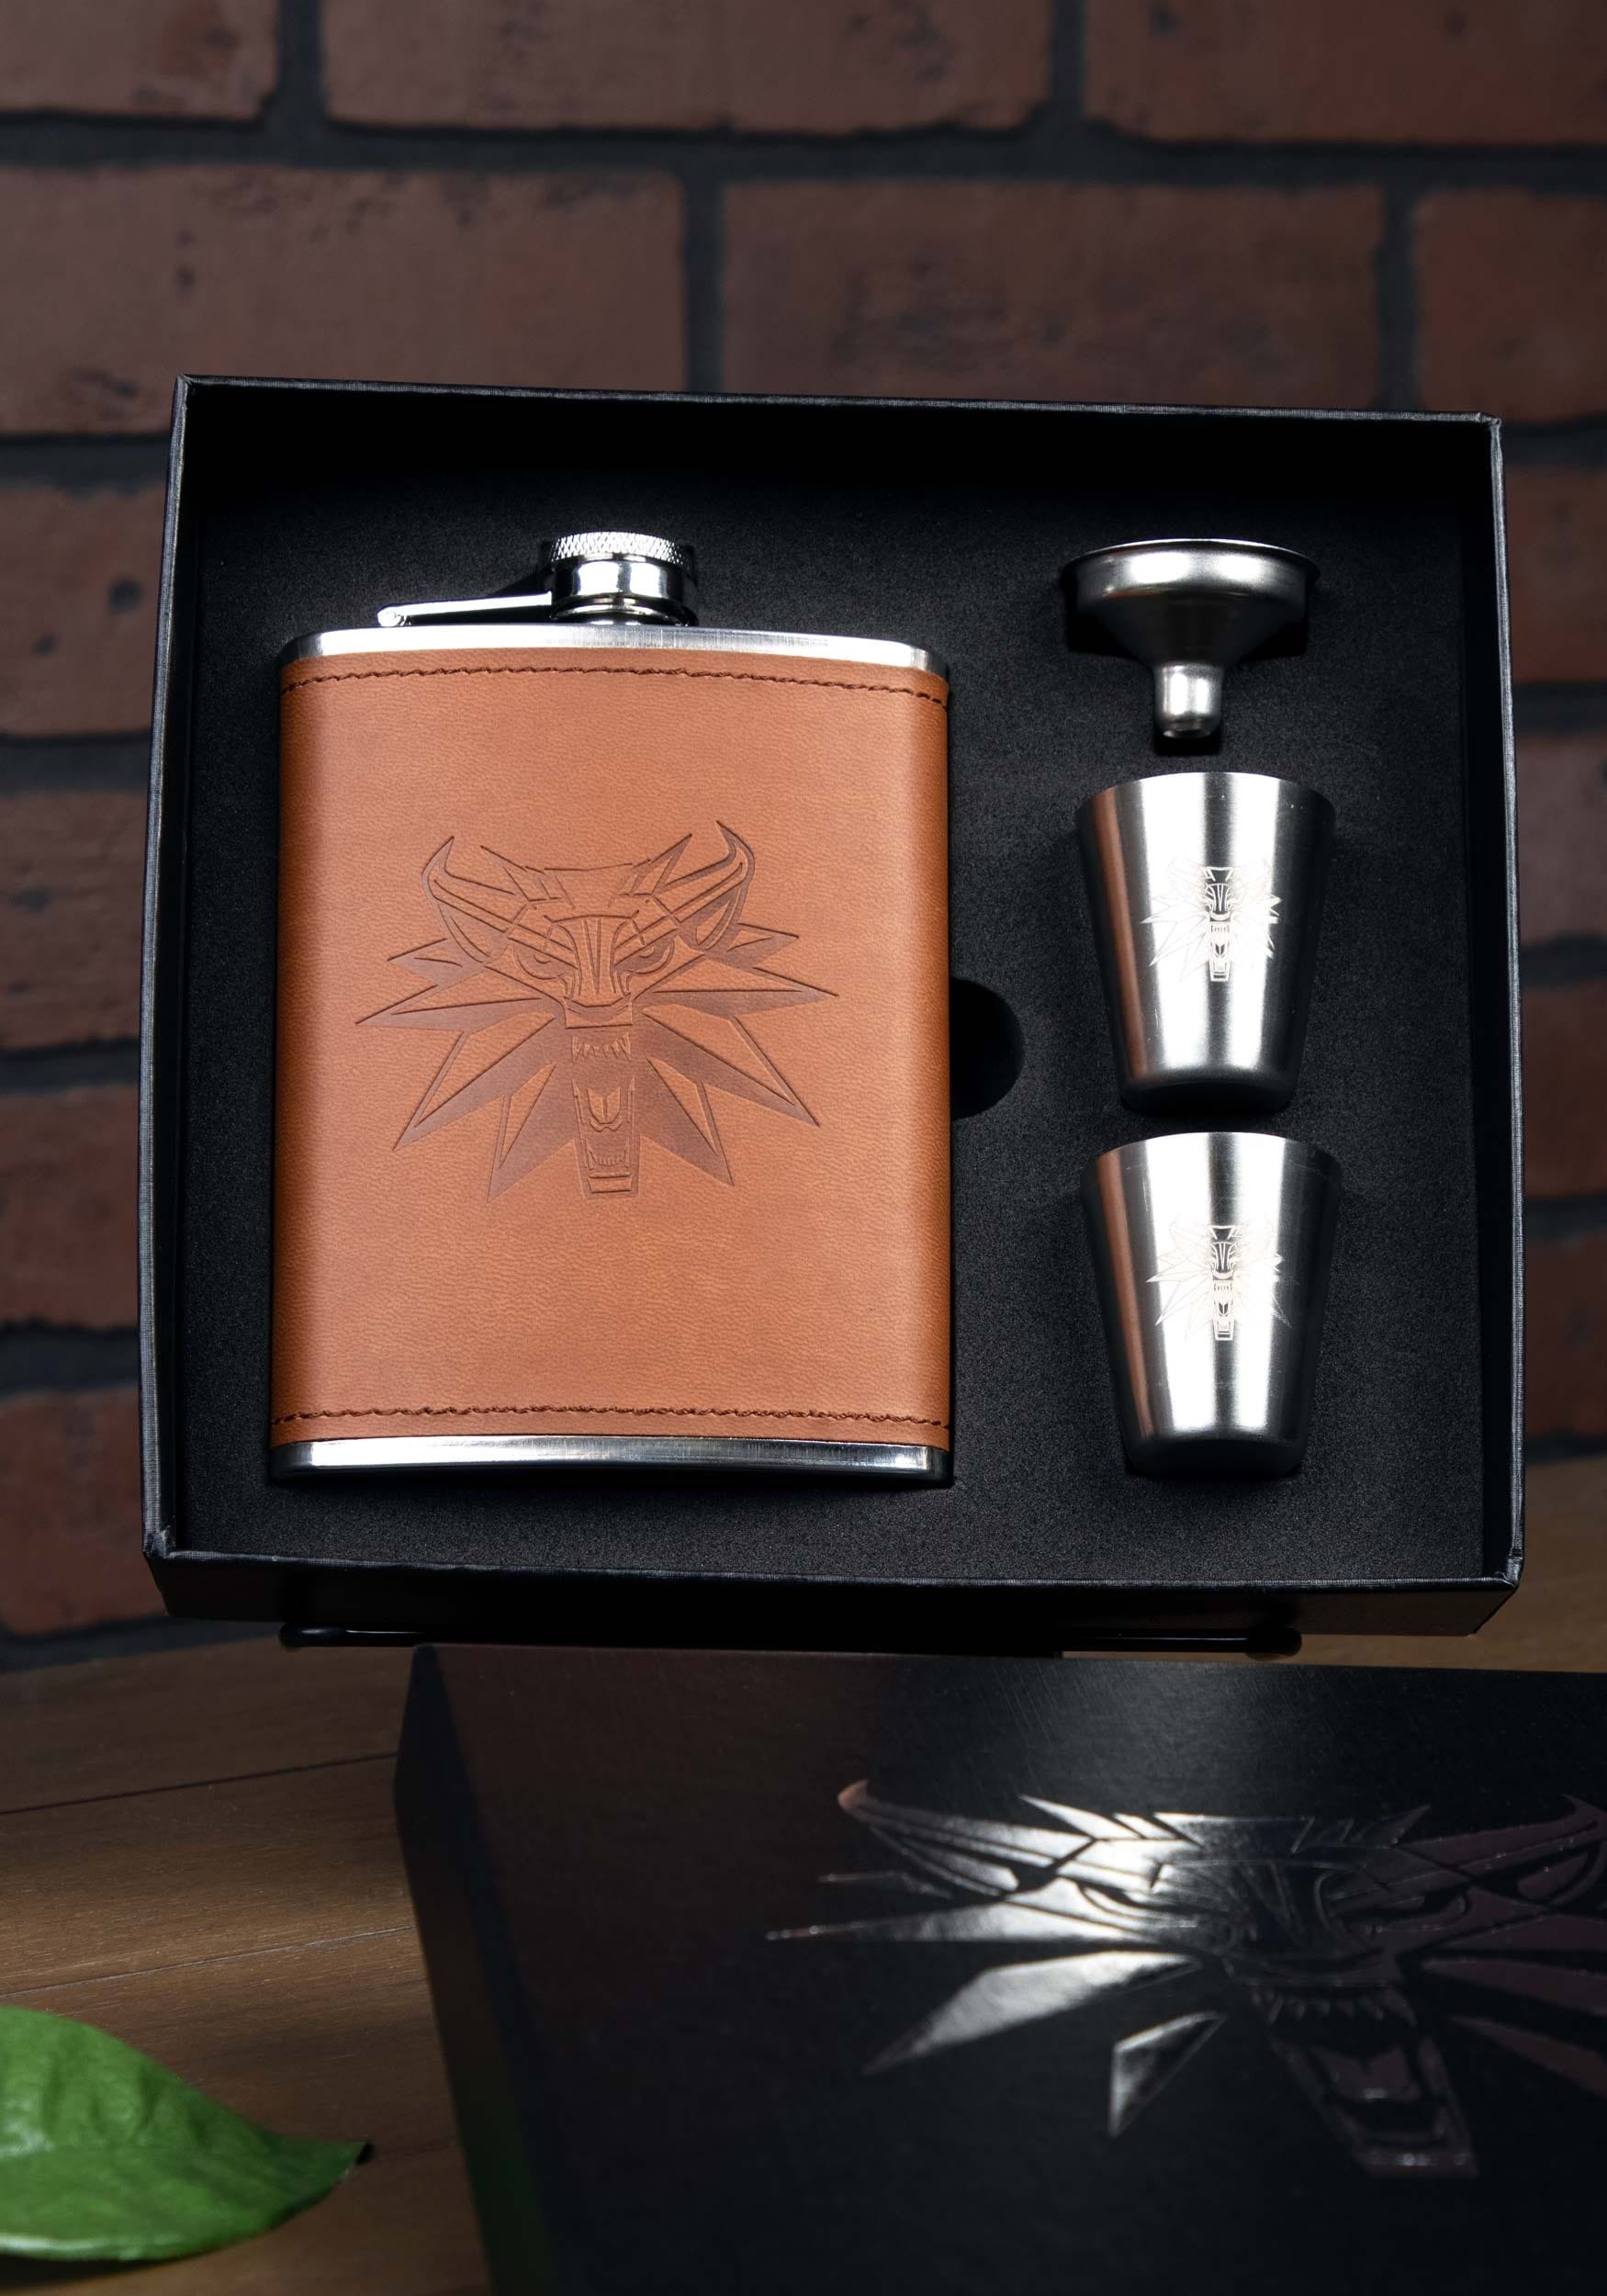 The Witcher Flask Set Deluxe